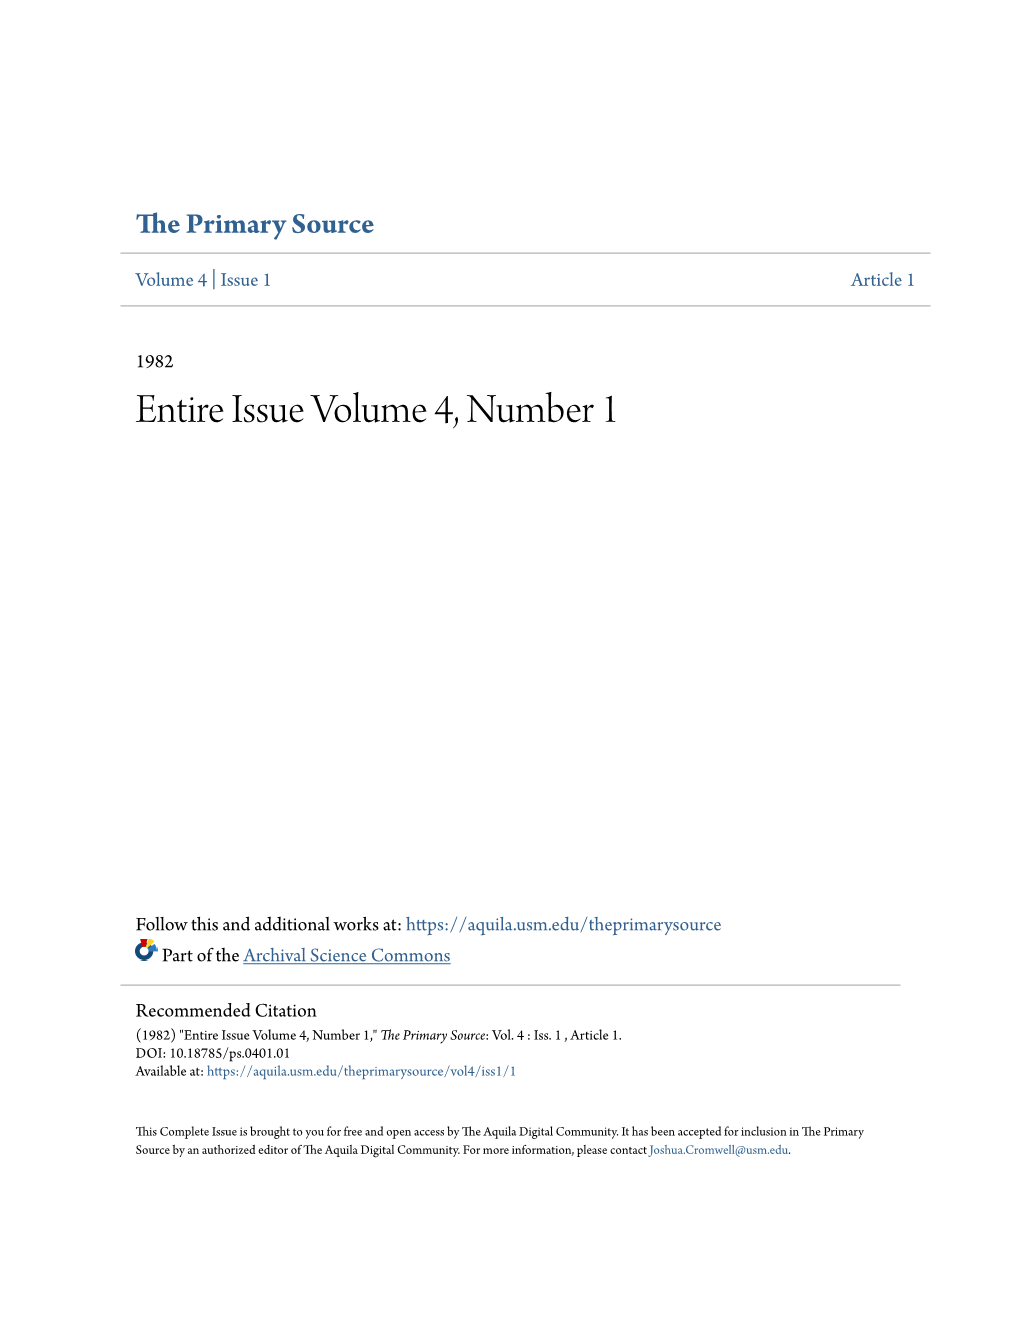 Entire Issue Volume 4, Number 1